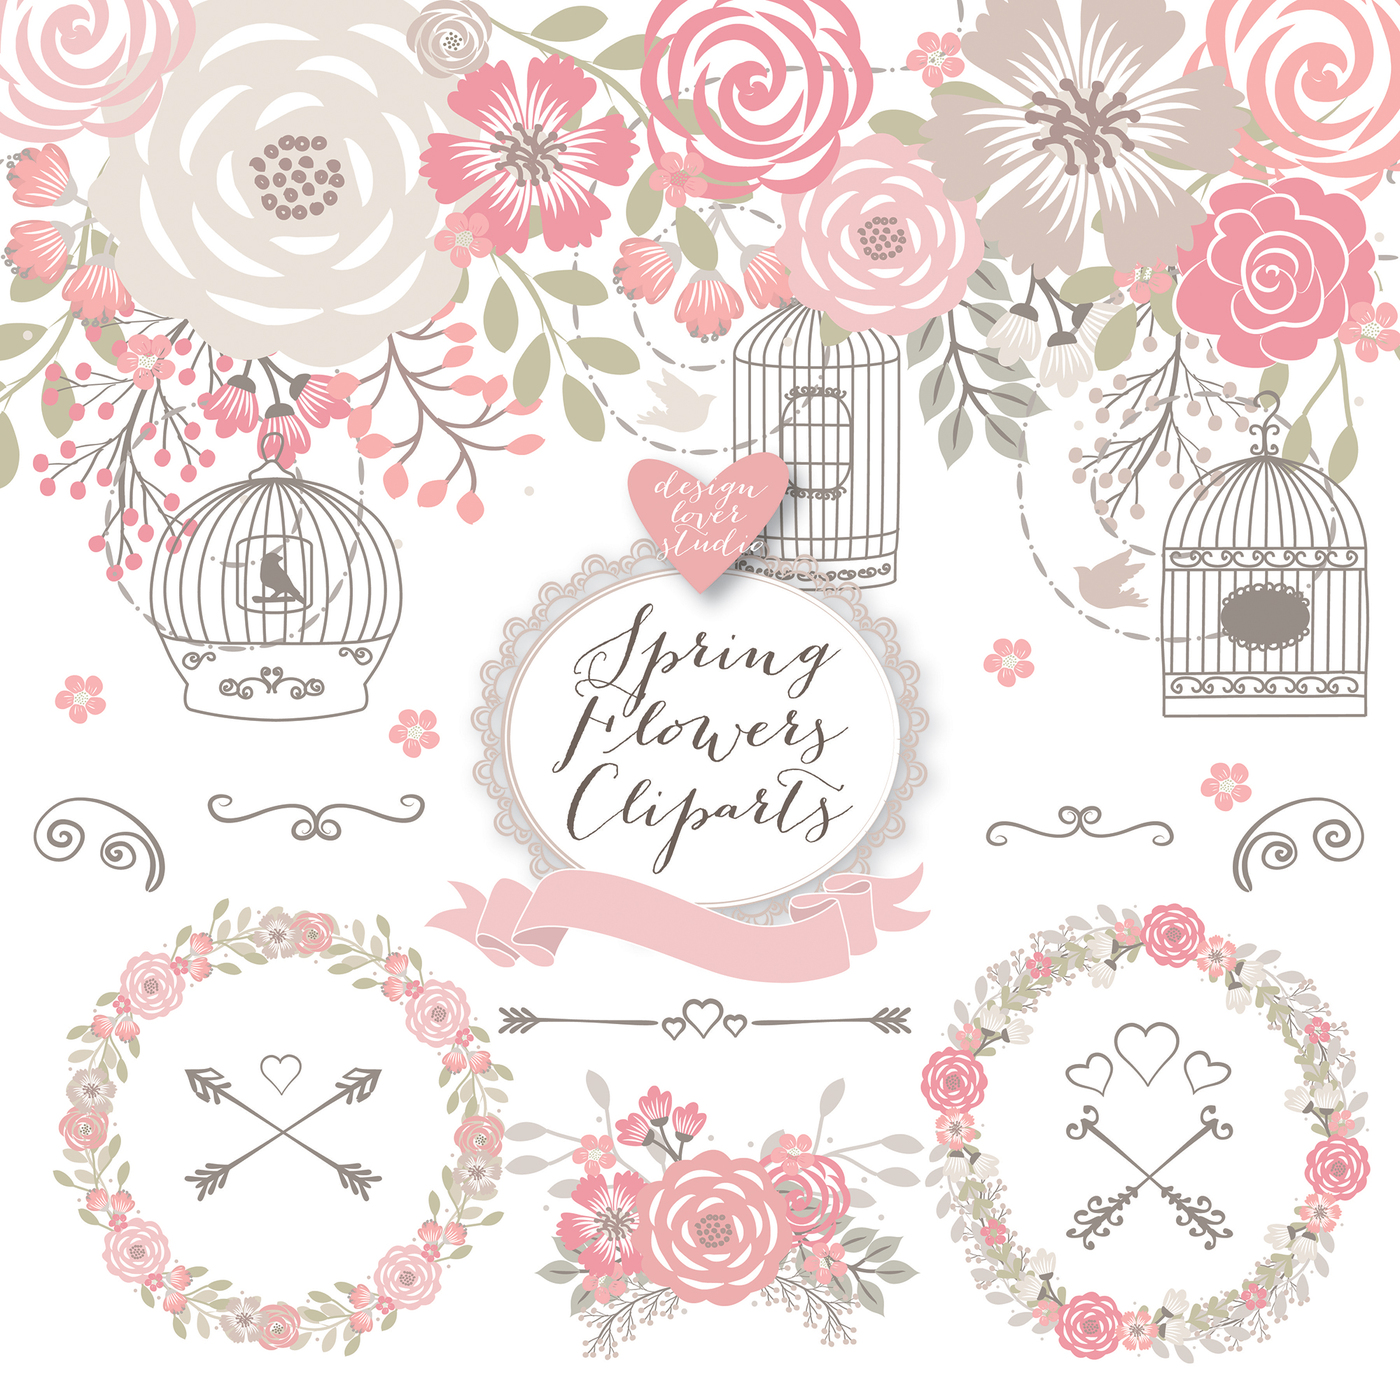 Shabby chic flowers clipart.